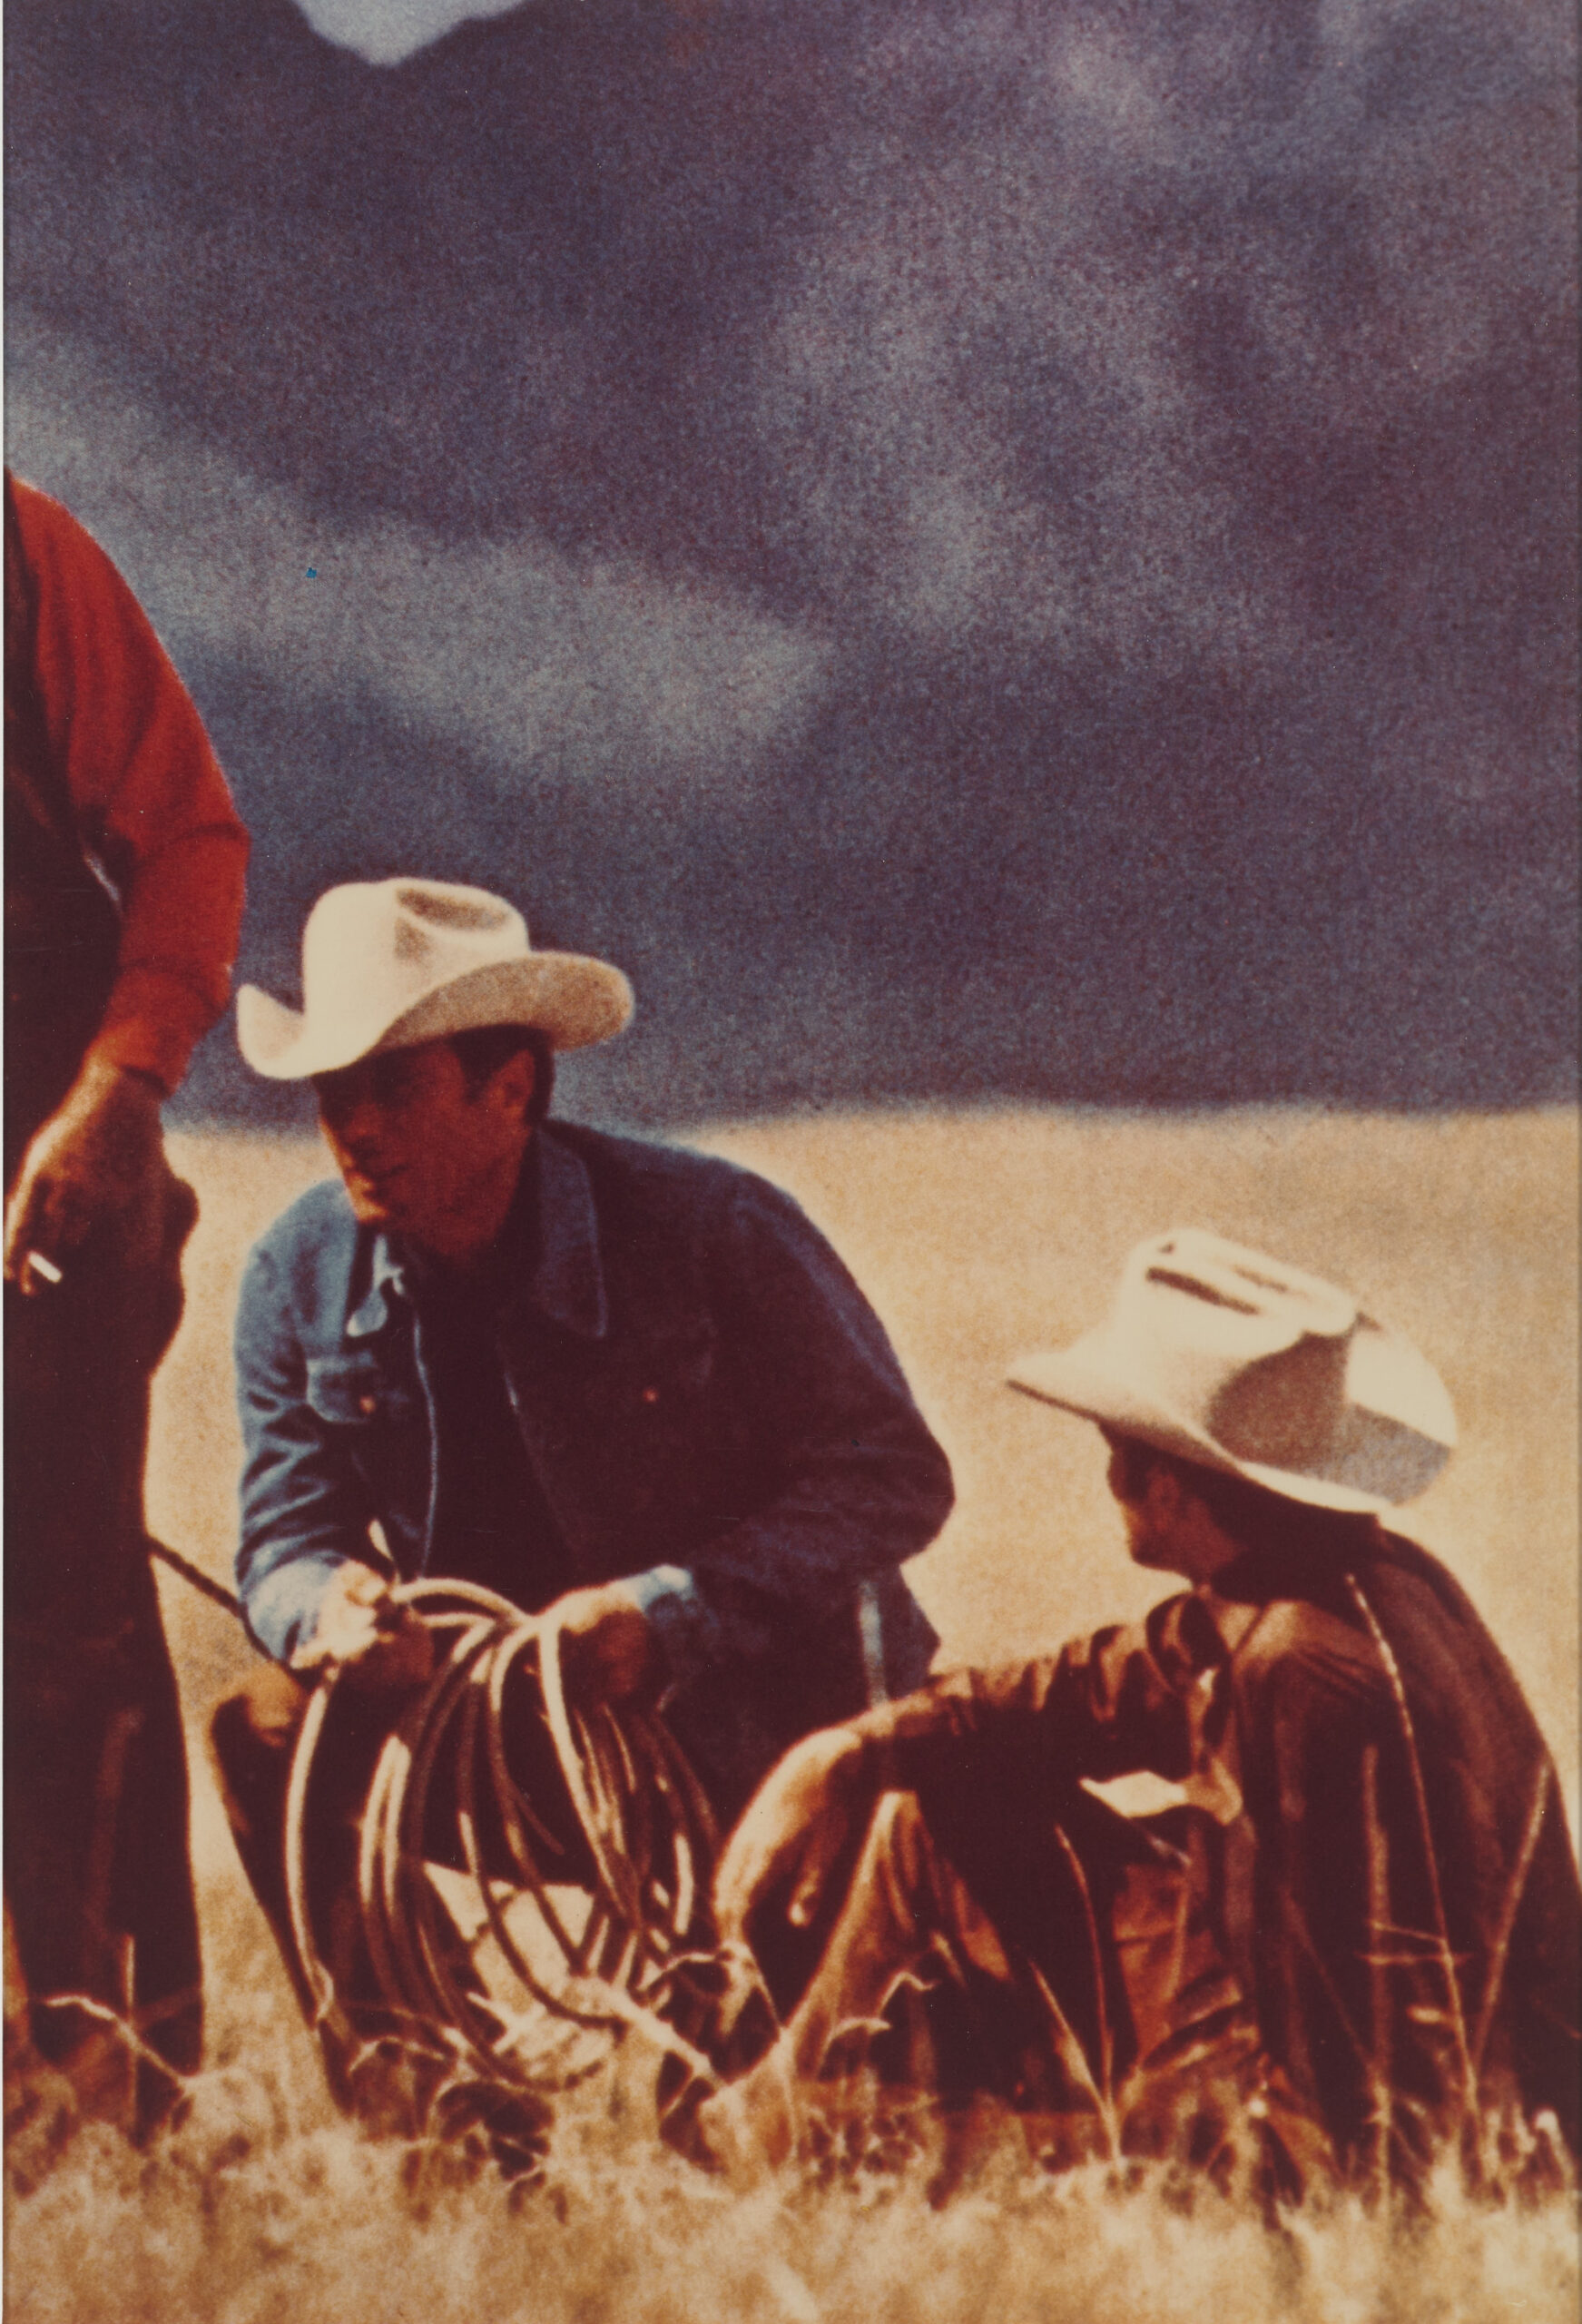 This is an artwork of an Ektacolor photograph depicting three cowboys in a field under a stormy sky. The central figure is seated and holding a lasso, flanked by another cowboy kneeling and a standing figure partially cropped from the frame.